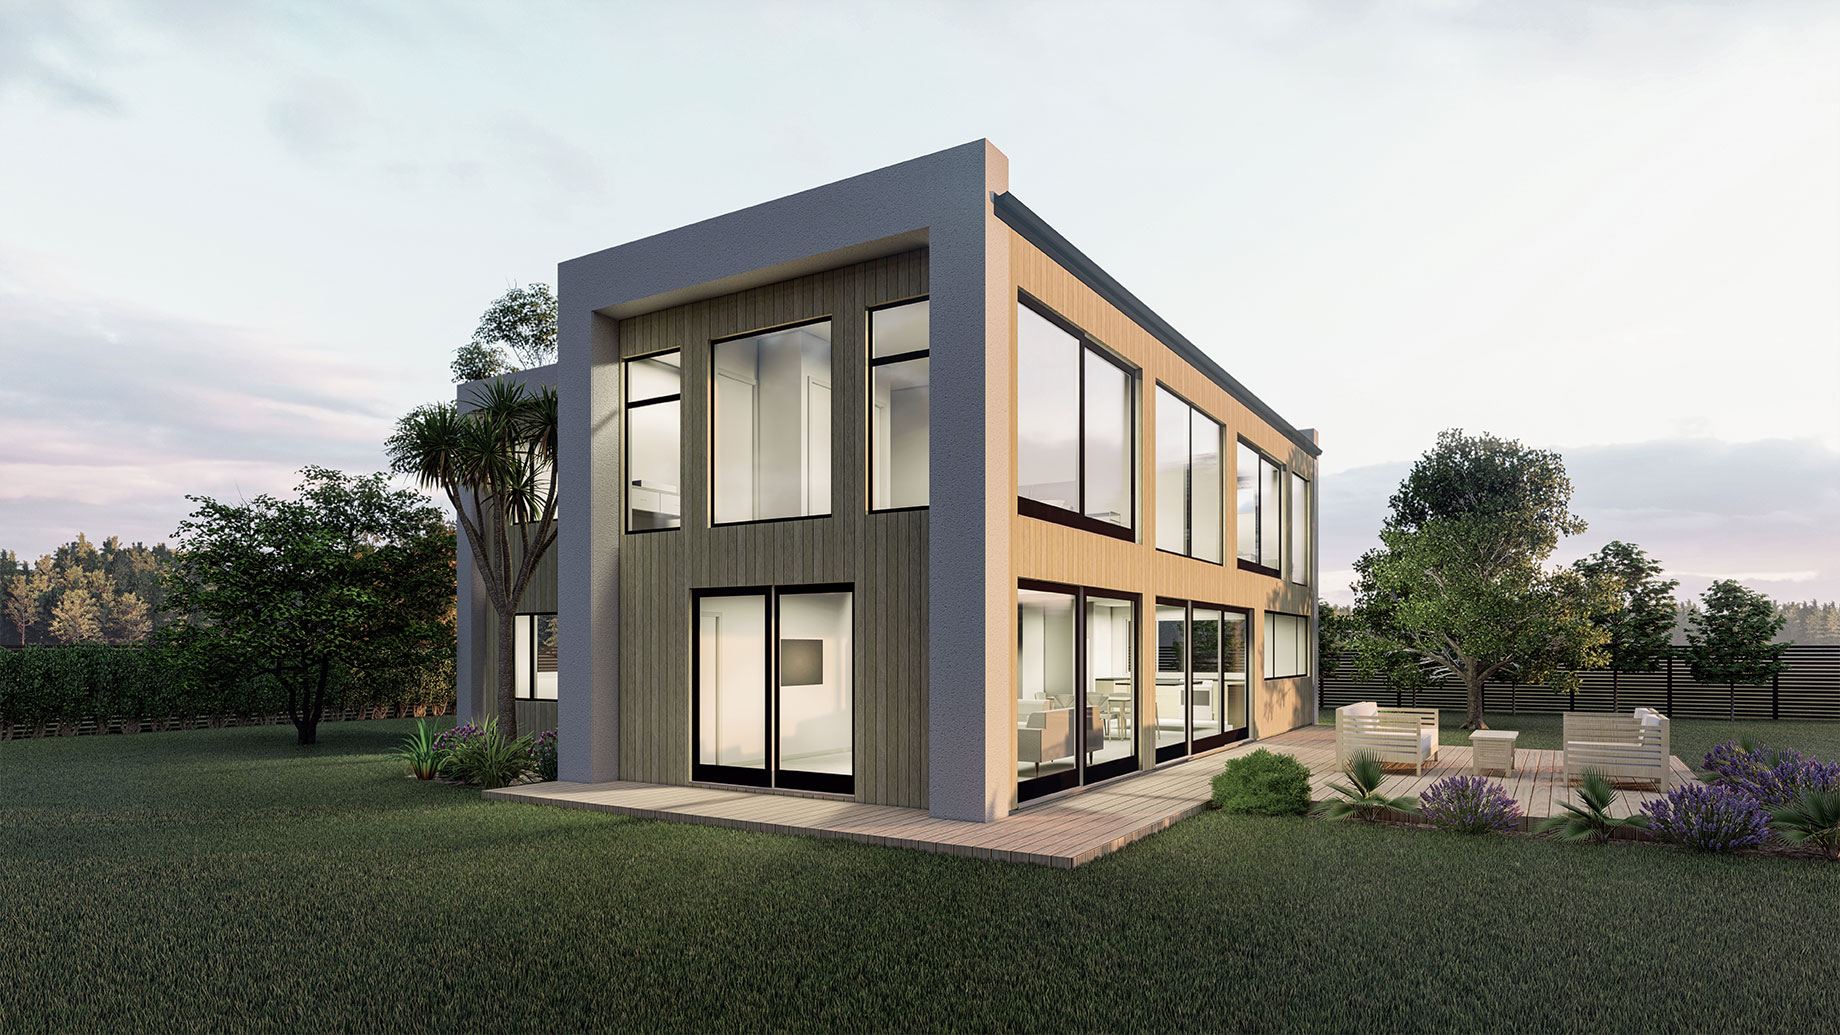 Two storey house with large windows exterior render